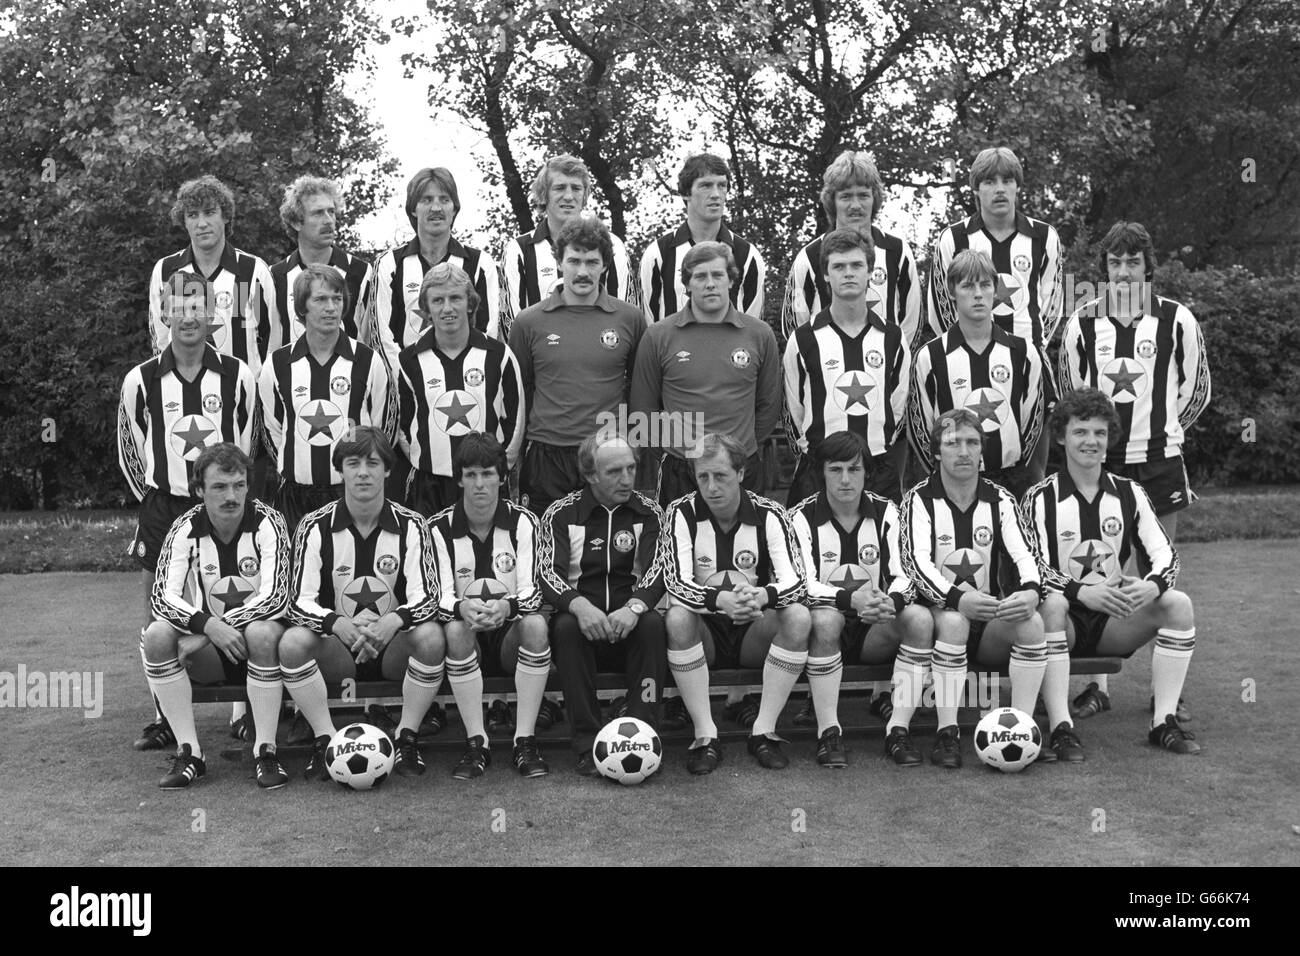 Football - Newcastle United Photocall - Saison 1980-1981 Banque D'Images